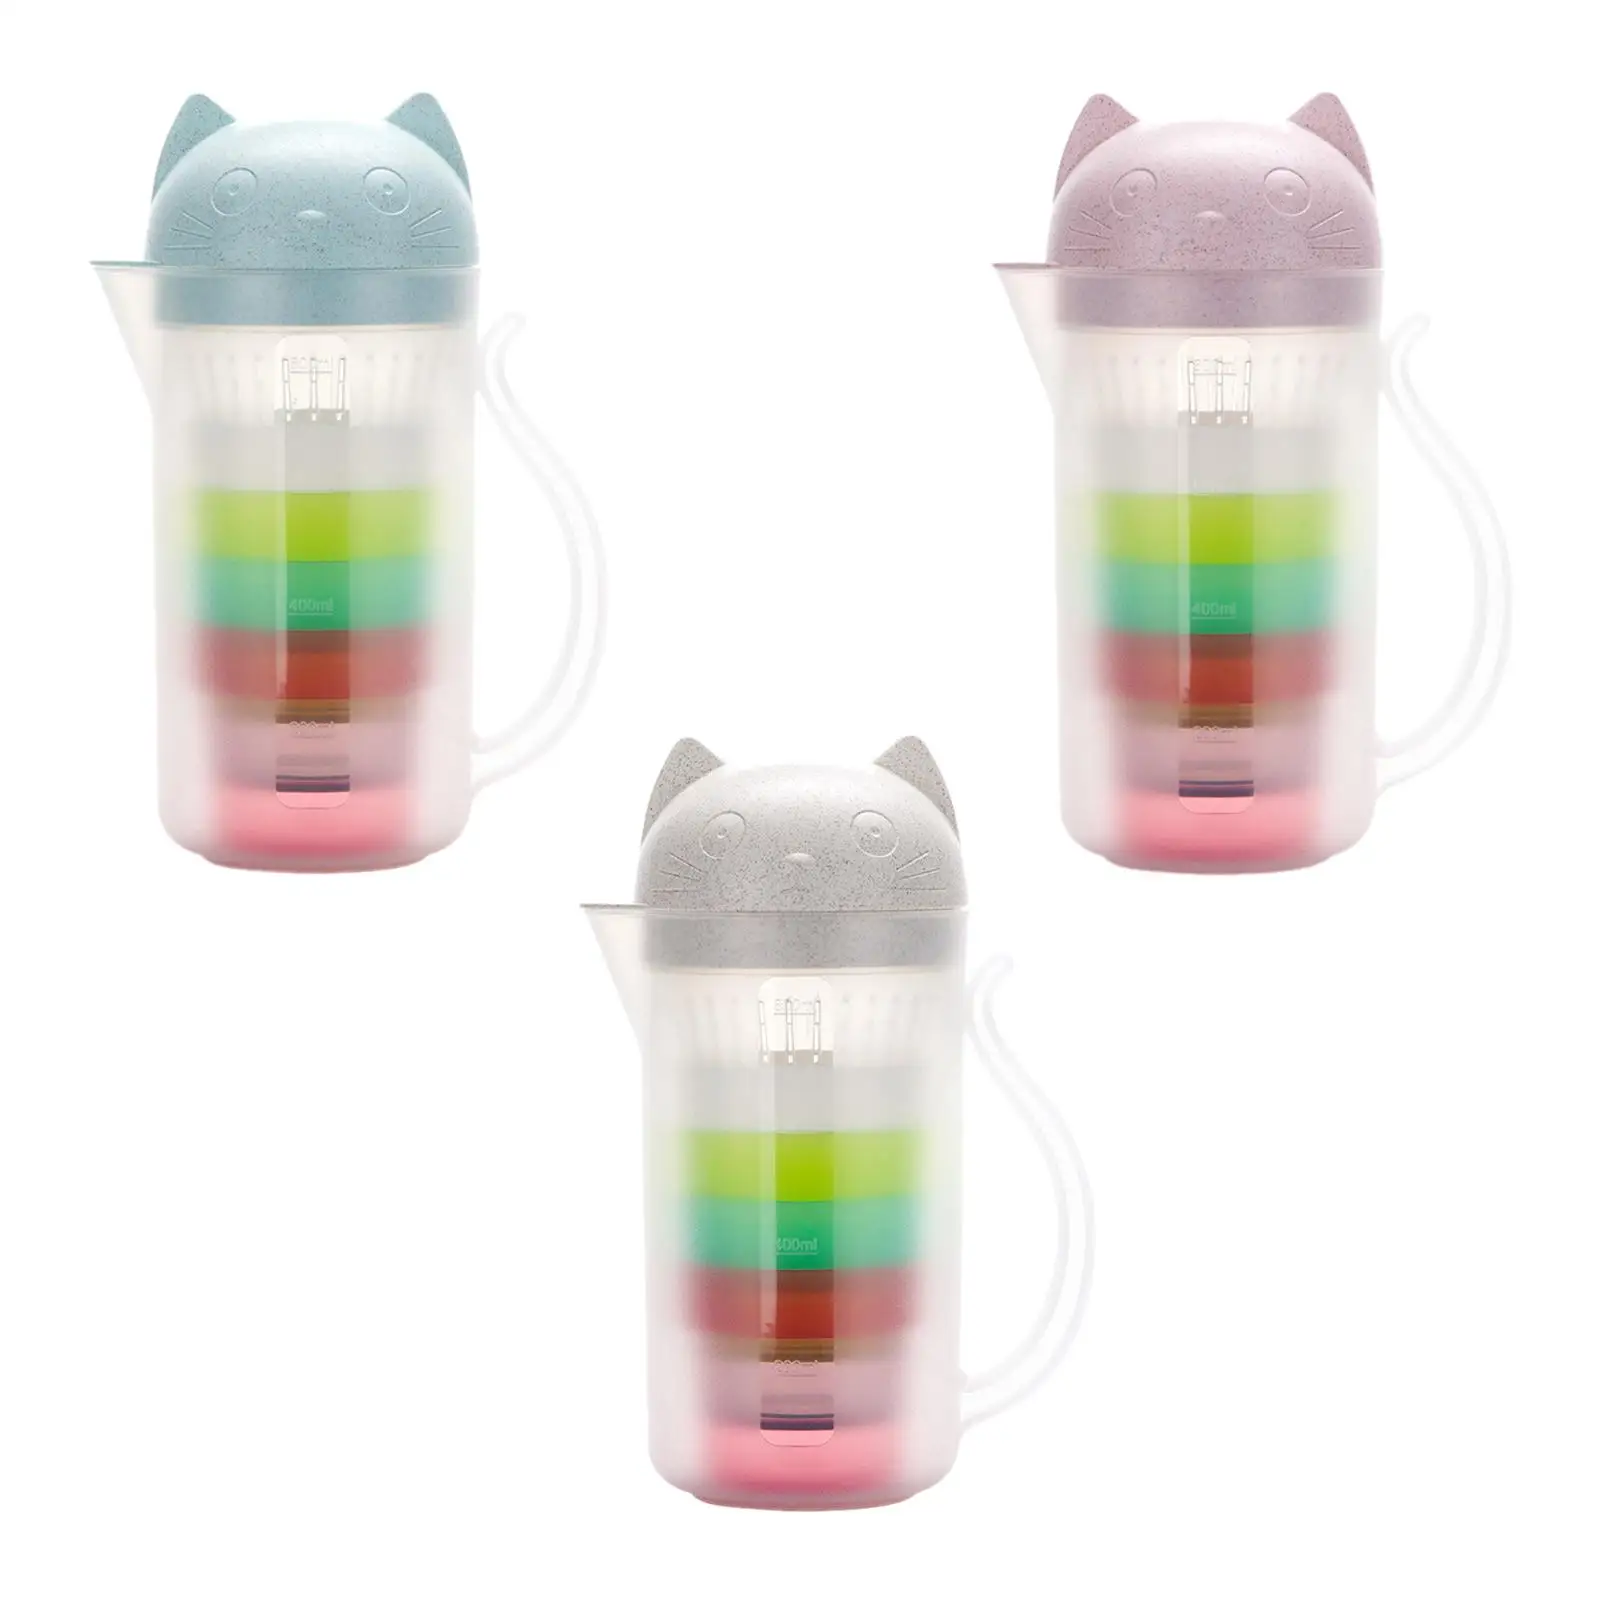 Beverage Serveware Drinkware Cute Water Pitcher with Cups Beverage Pitcher for Tea Coffee Hot/Cold Water Homemade Beverage BBQ